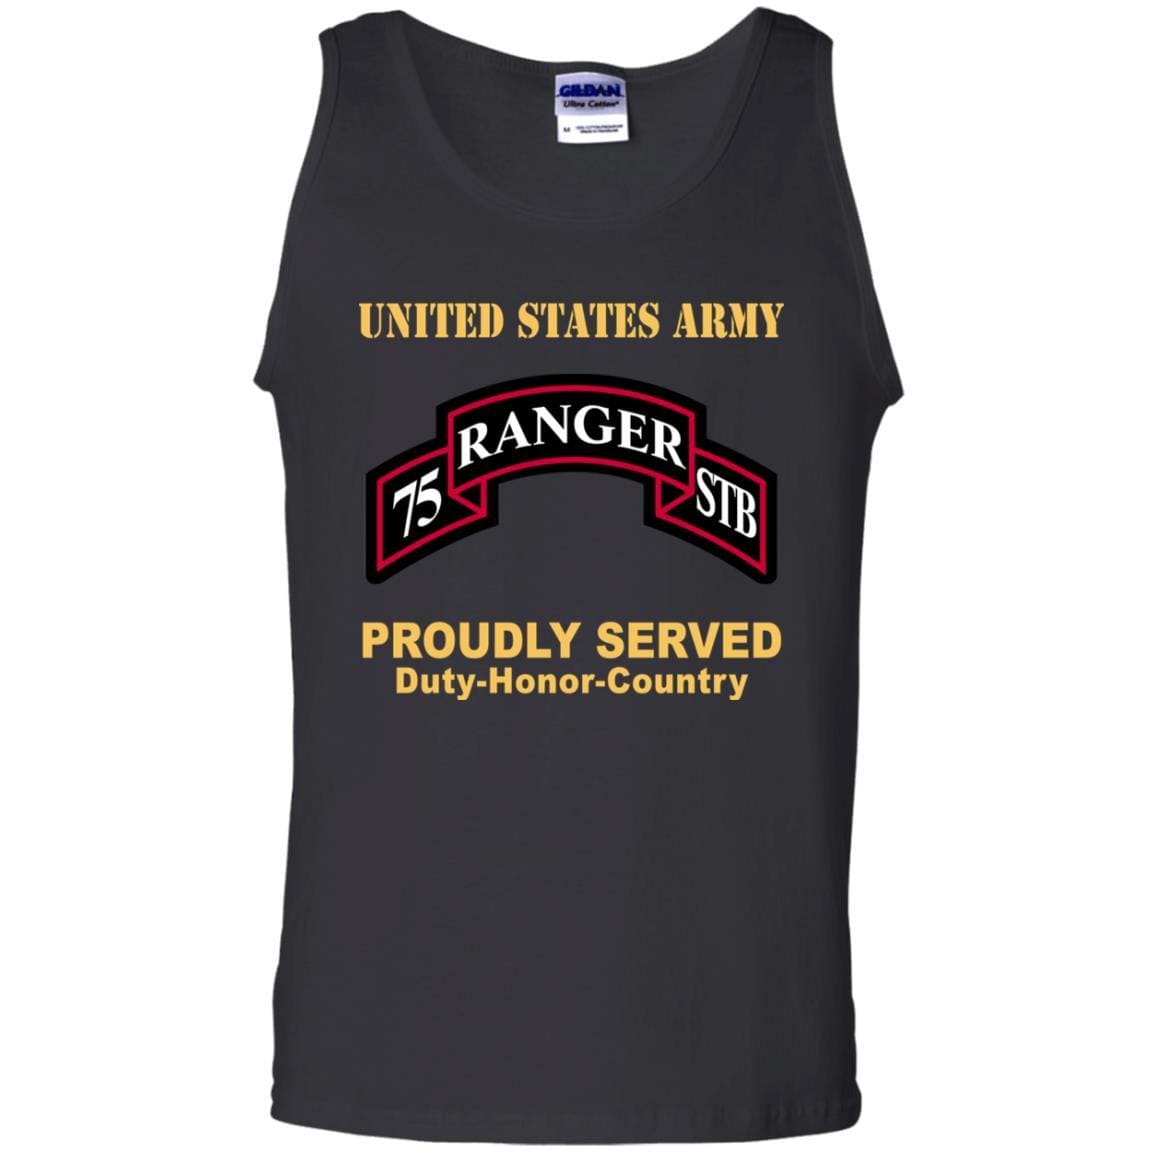 US ARMY 75TH RANGER REGIMENT SPECIALITY TROOPS BATTALION - Proudly Served T-Shirt On Front For Men-TShirt-Army-Veterans Nation